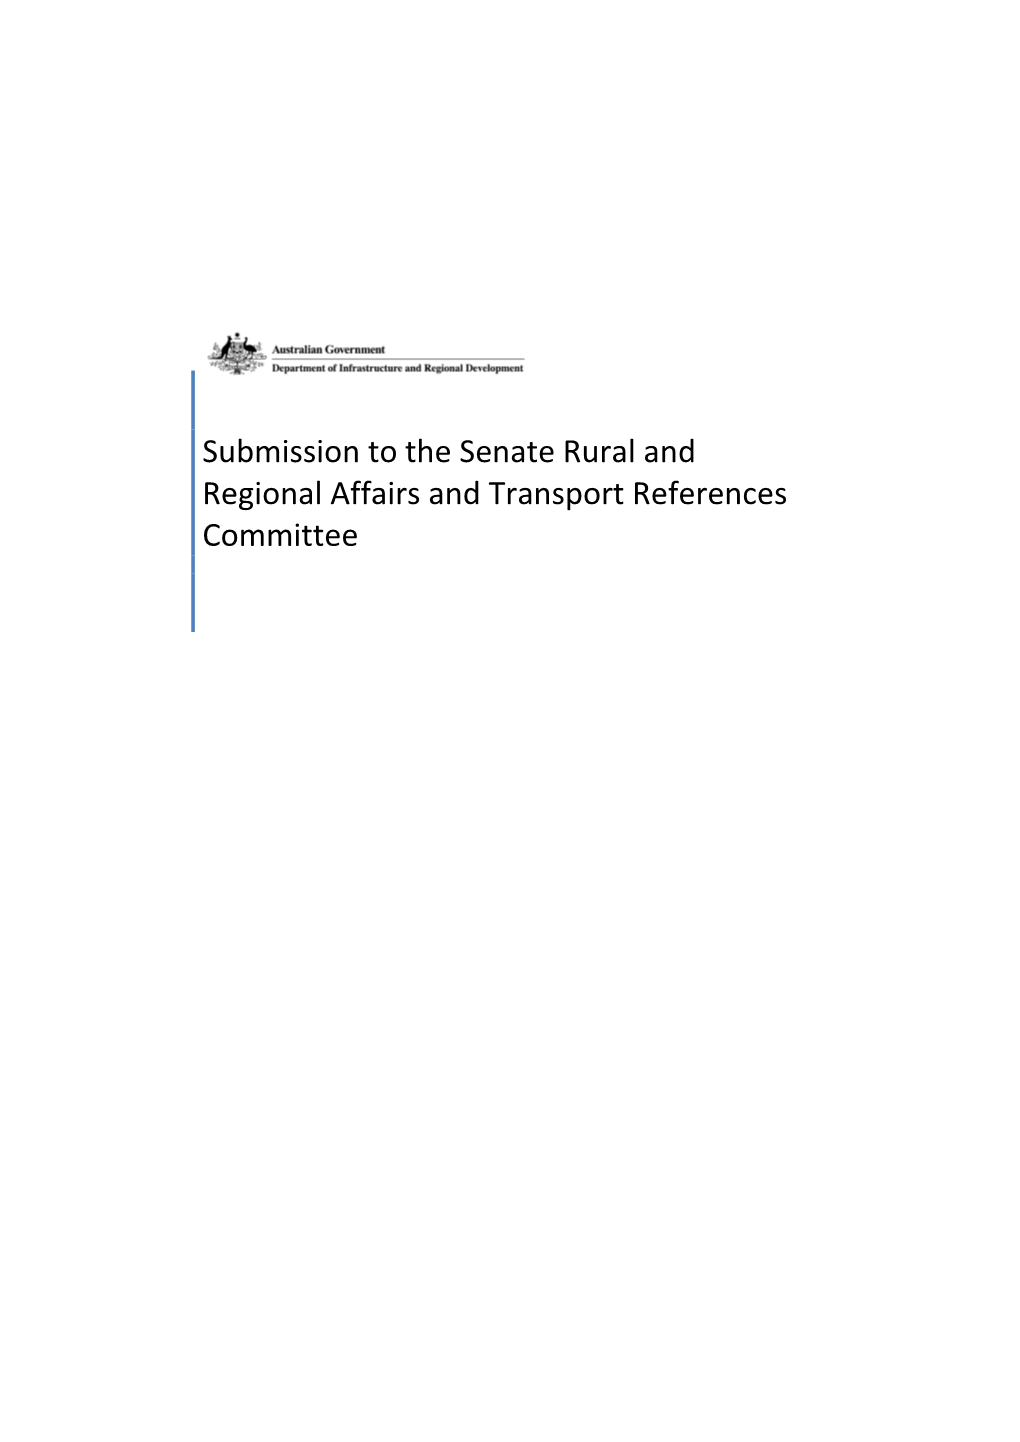 Submission to the Senate Rural and Regional Affairs and Transport References Committee